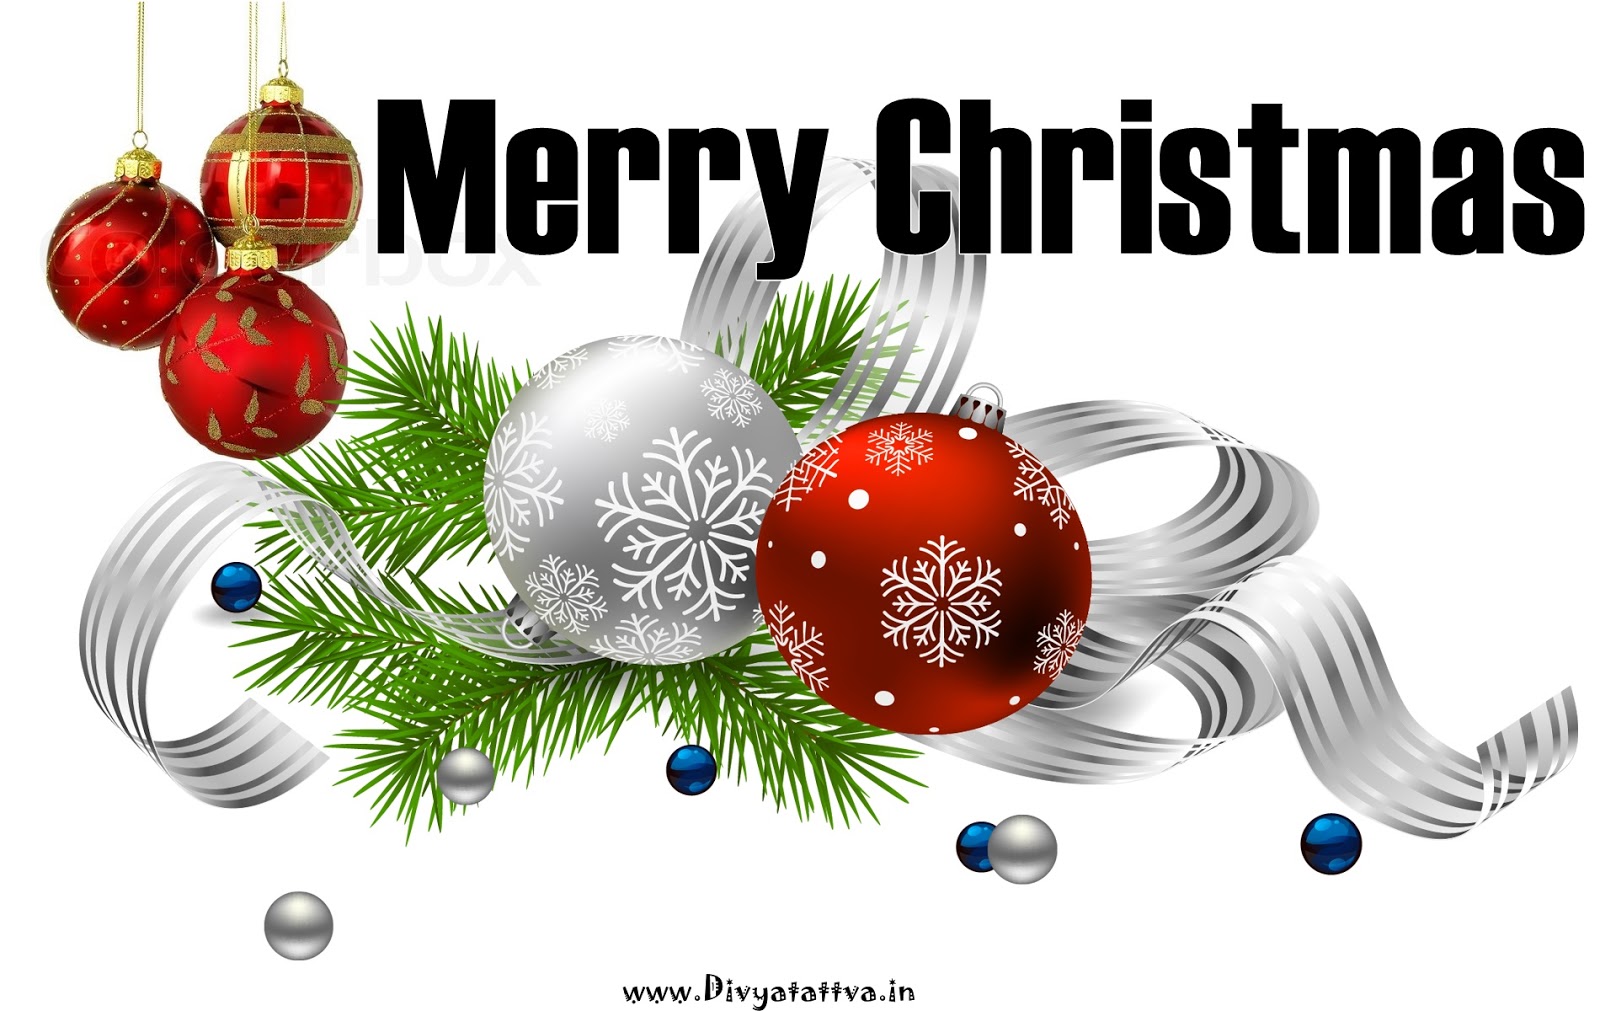 Xmas Wallpaper 25th December Pictures, Christmas Wallpaper - Christmas Decor Png Transparent , HD Wallpaper & Backgrounds